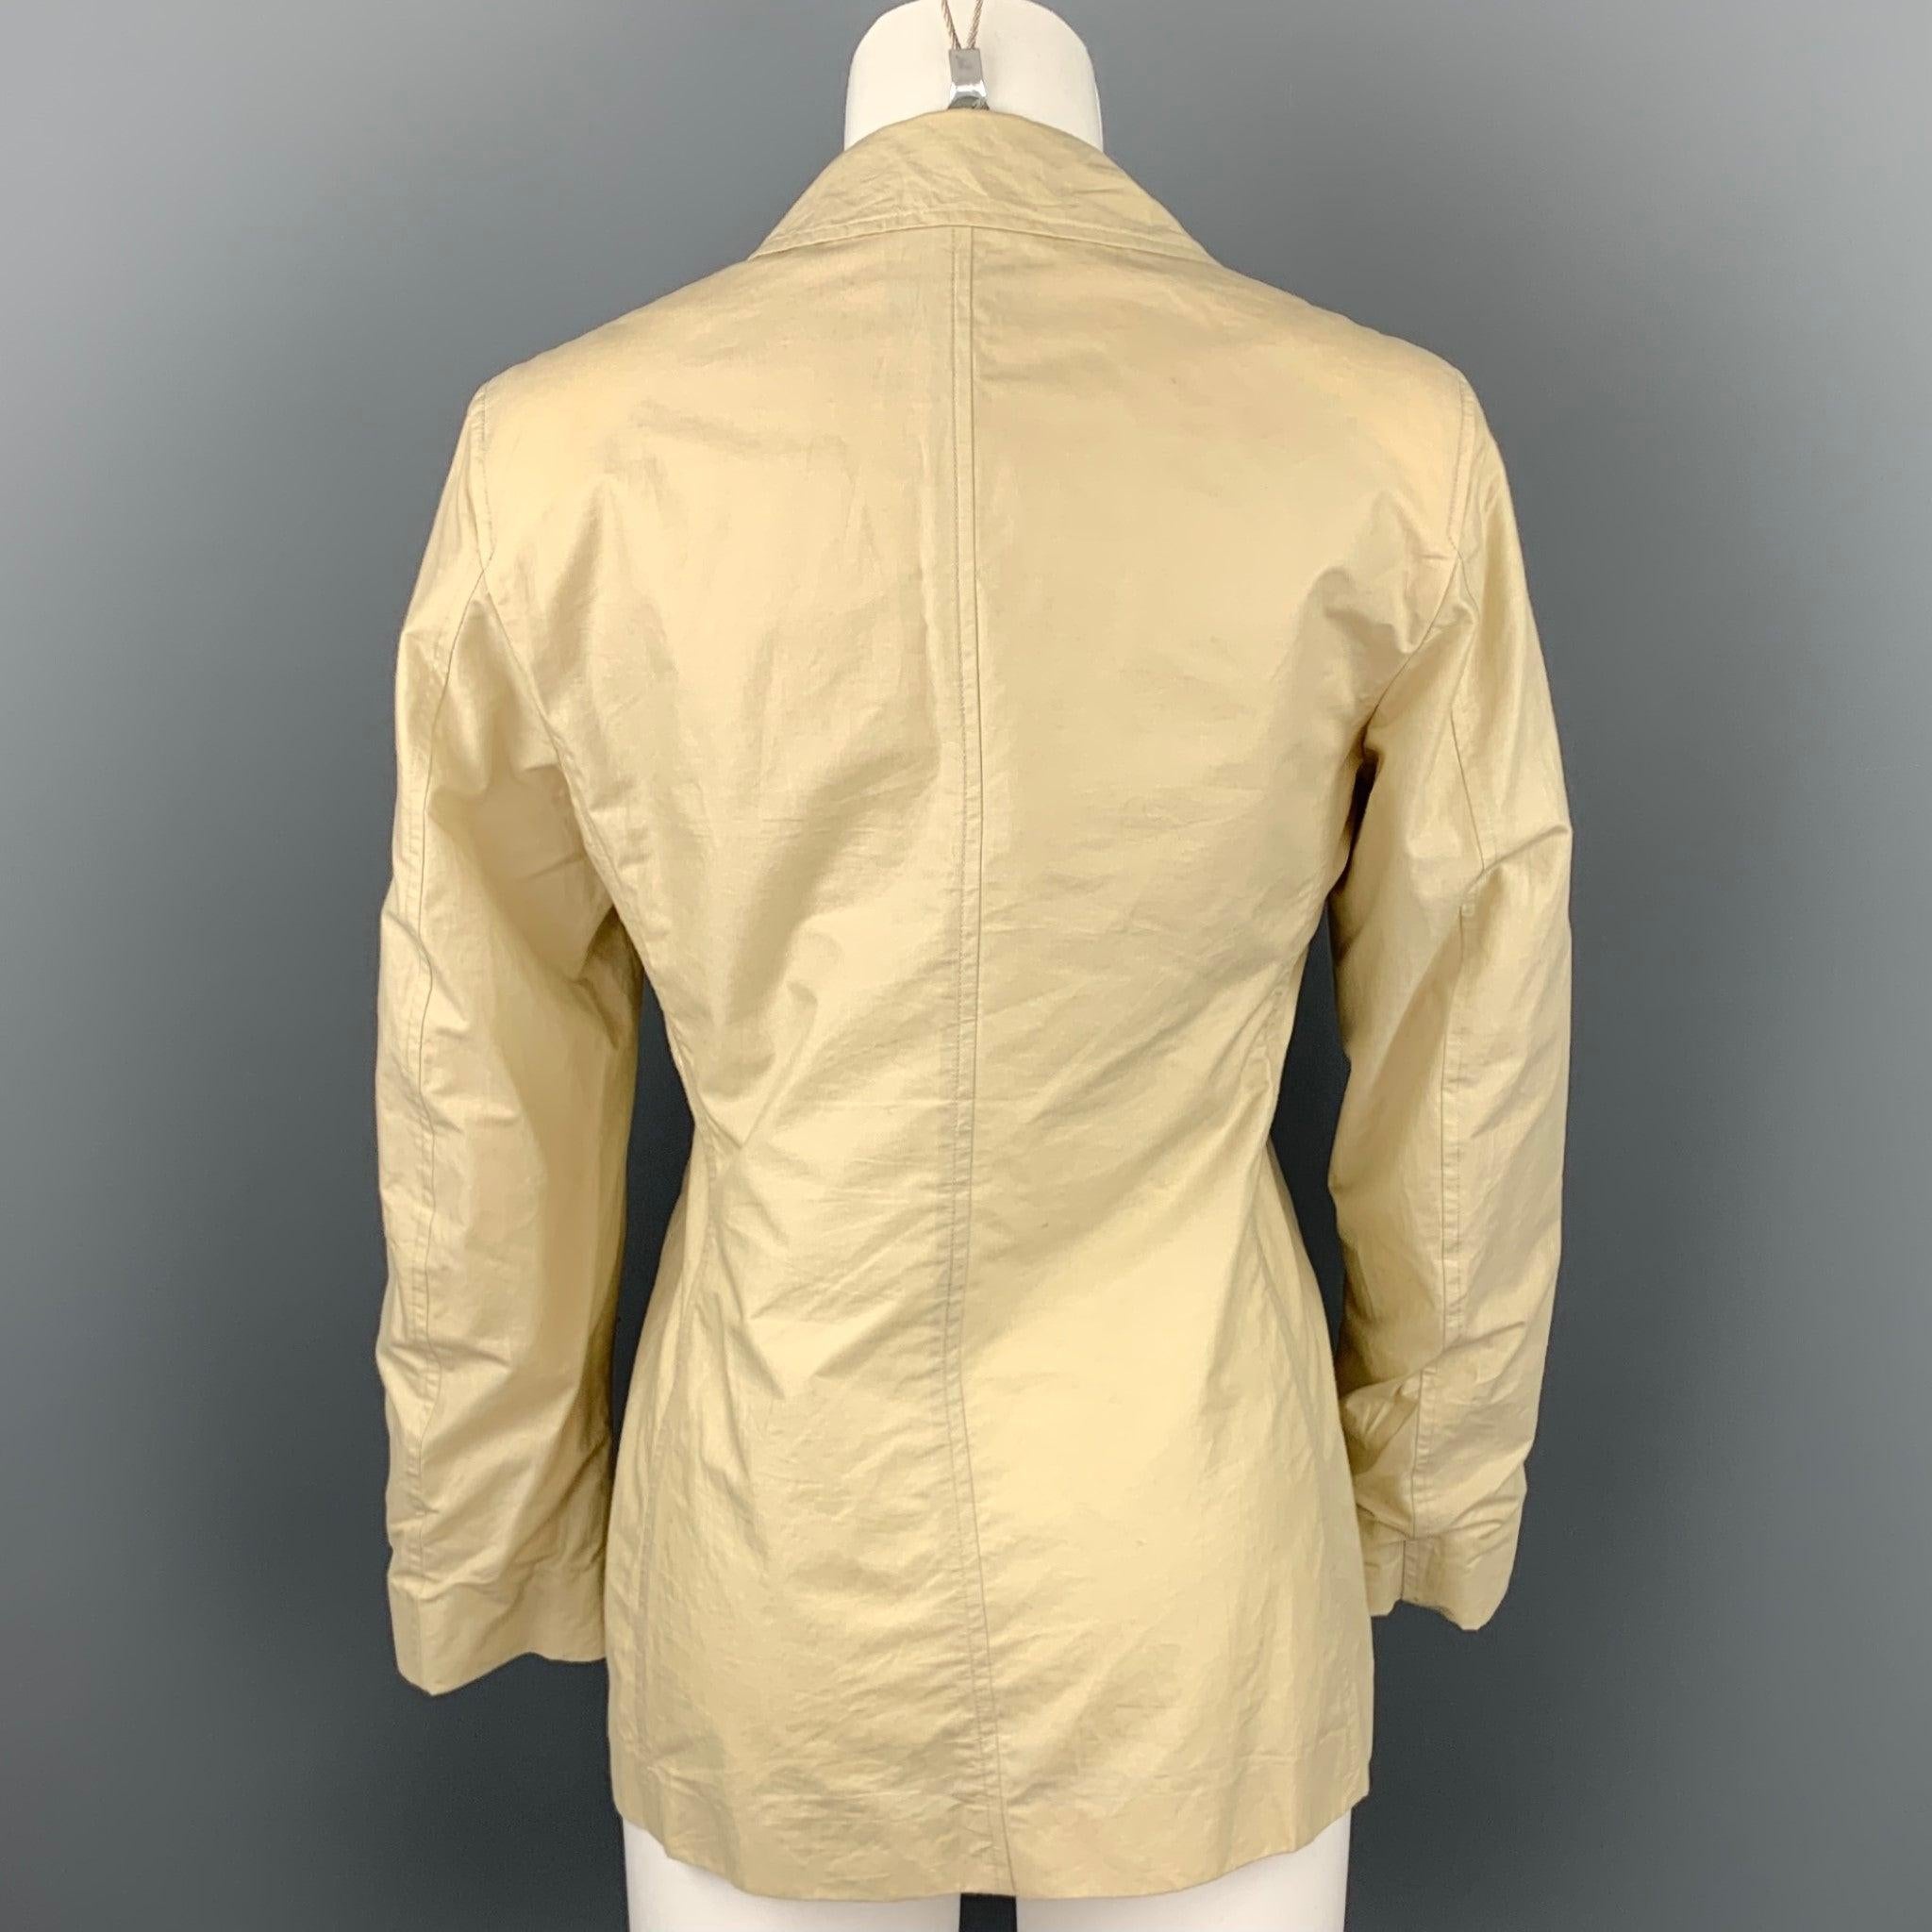 Women's STRENESSE Size 6 Beige Cotton Patch Pocket Buttoned Jacket For Sale